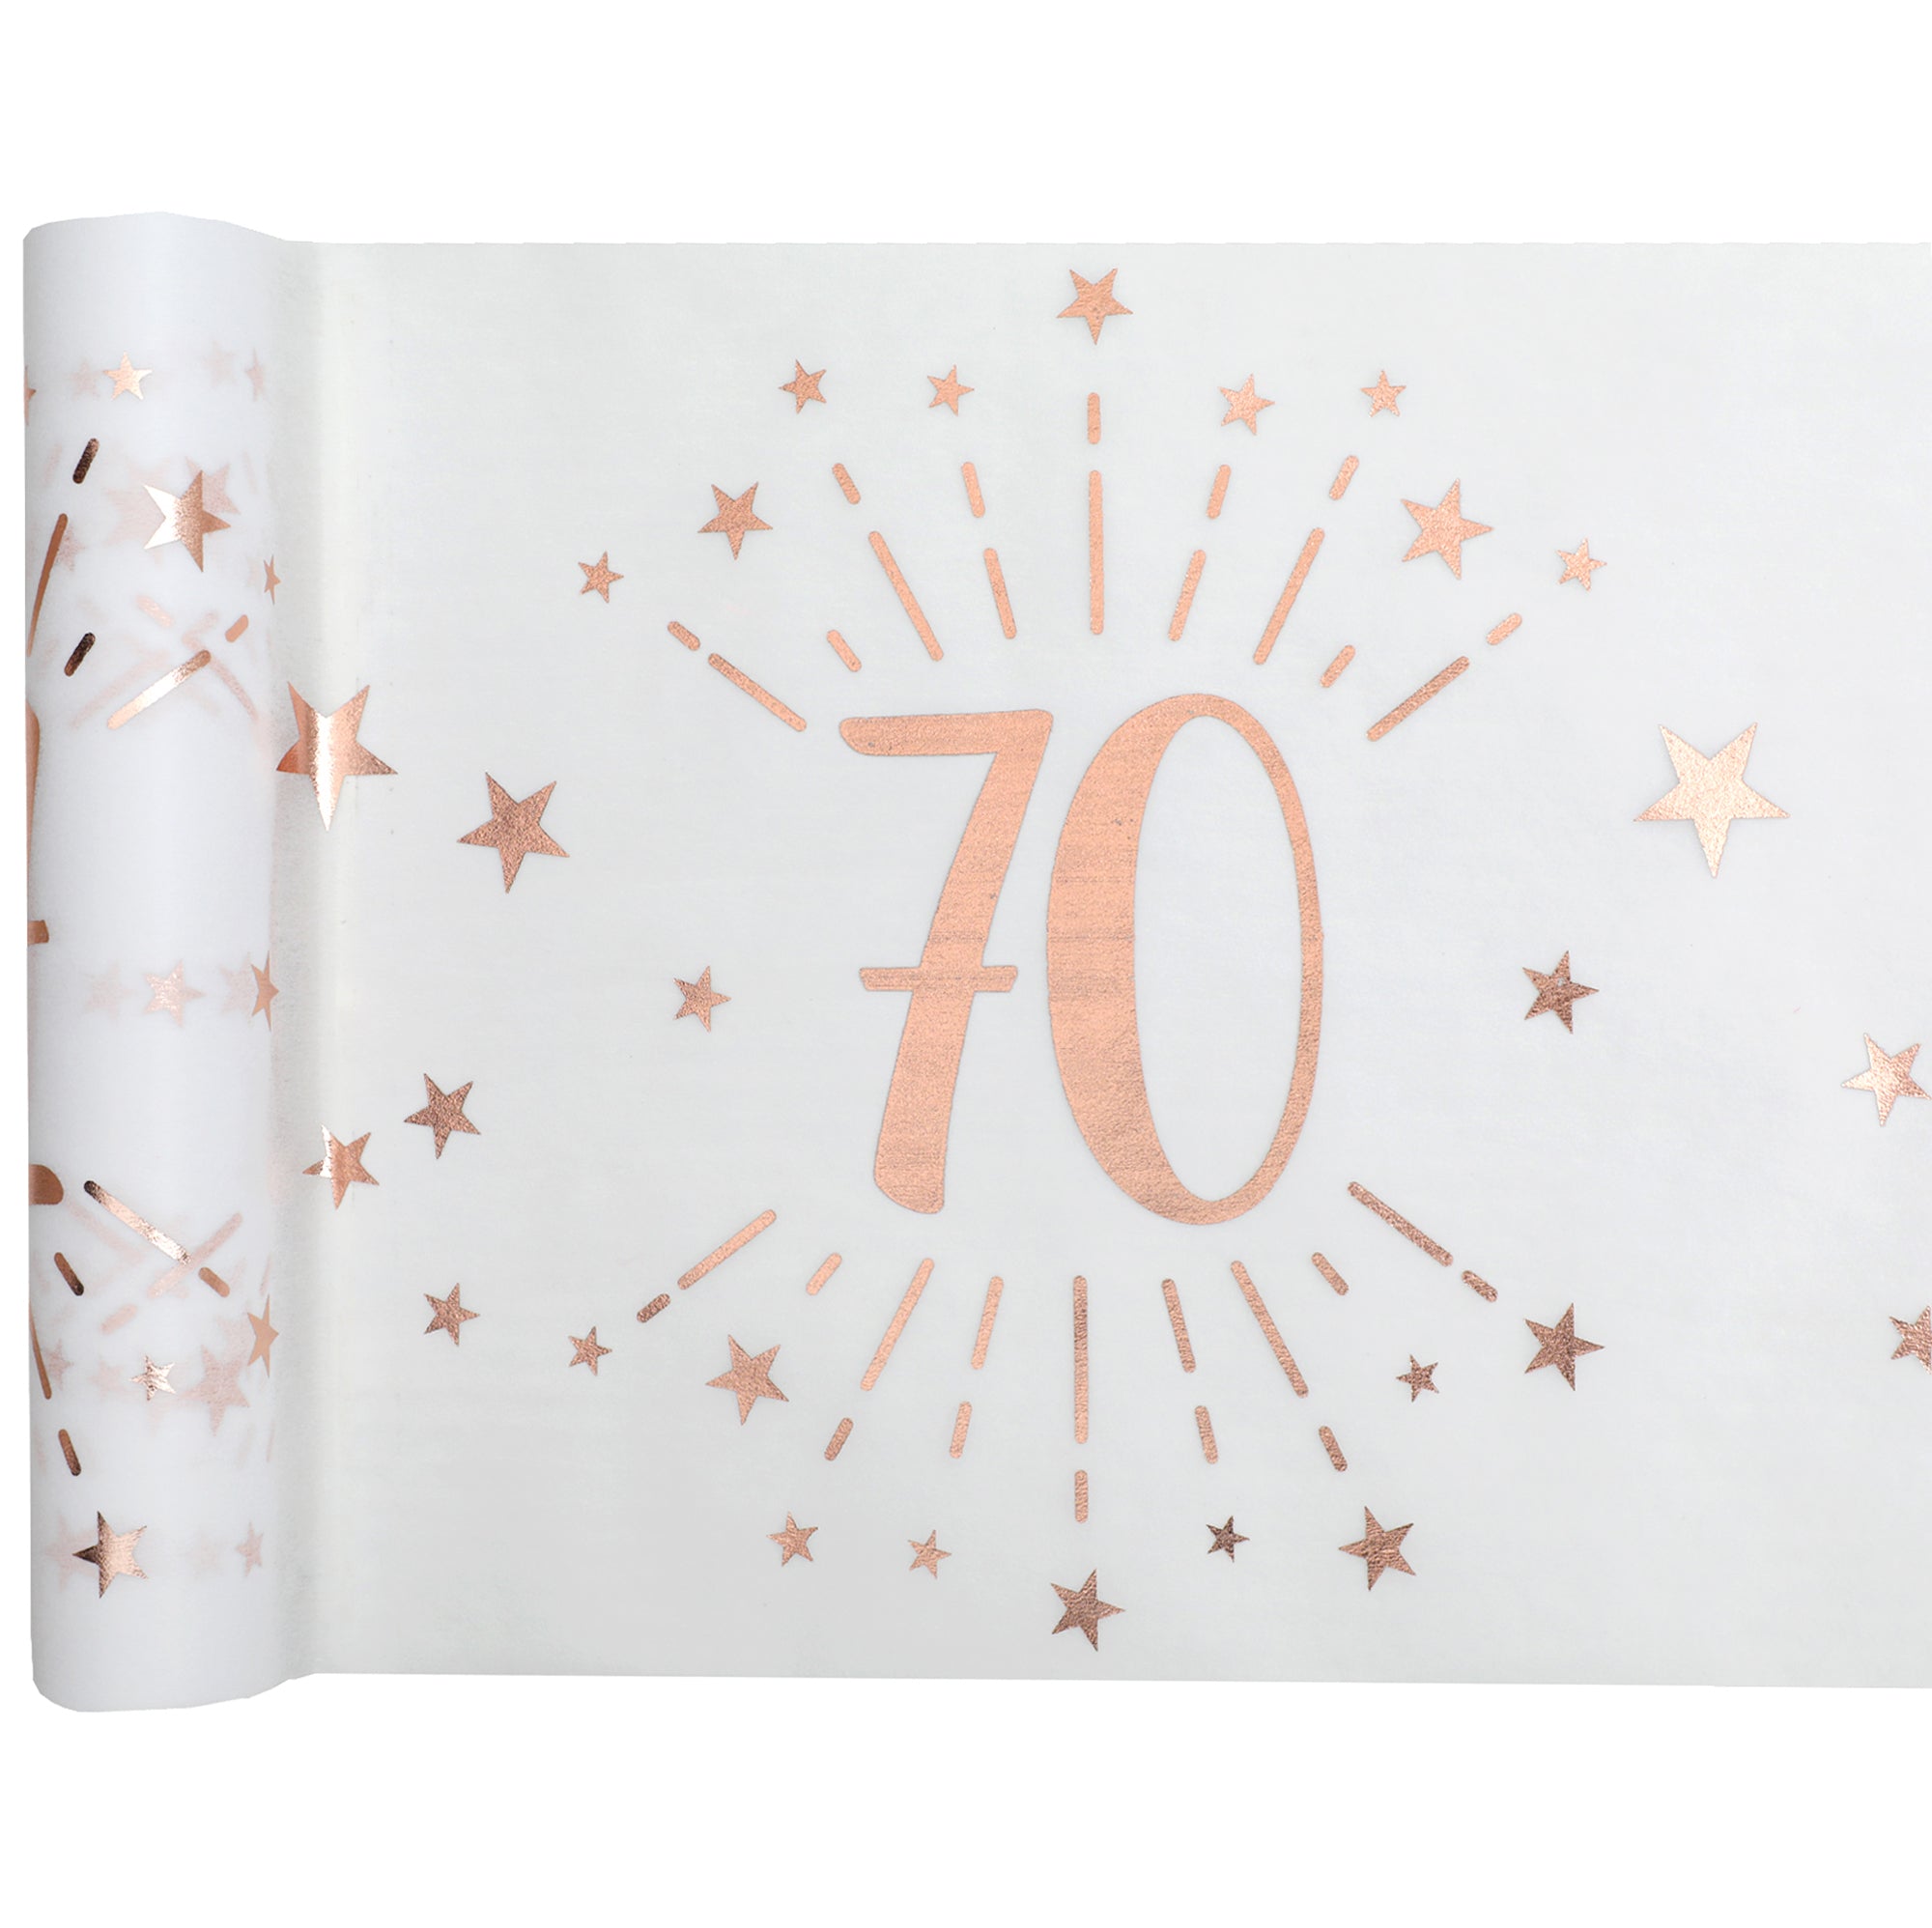 Sparkling Age 70 Table Runner Rose Gold 12x195in